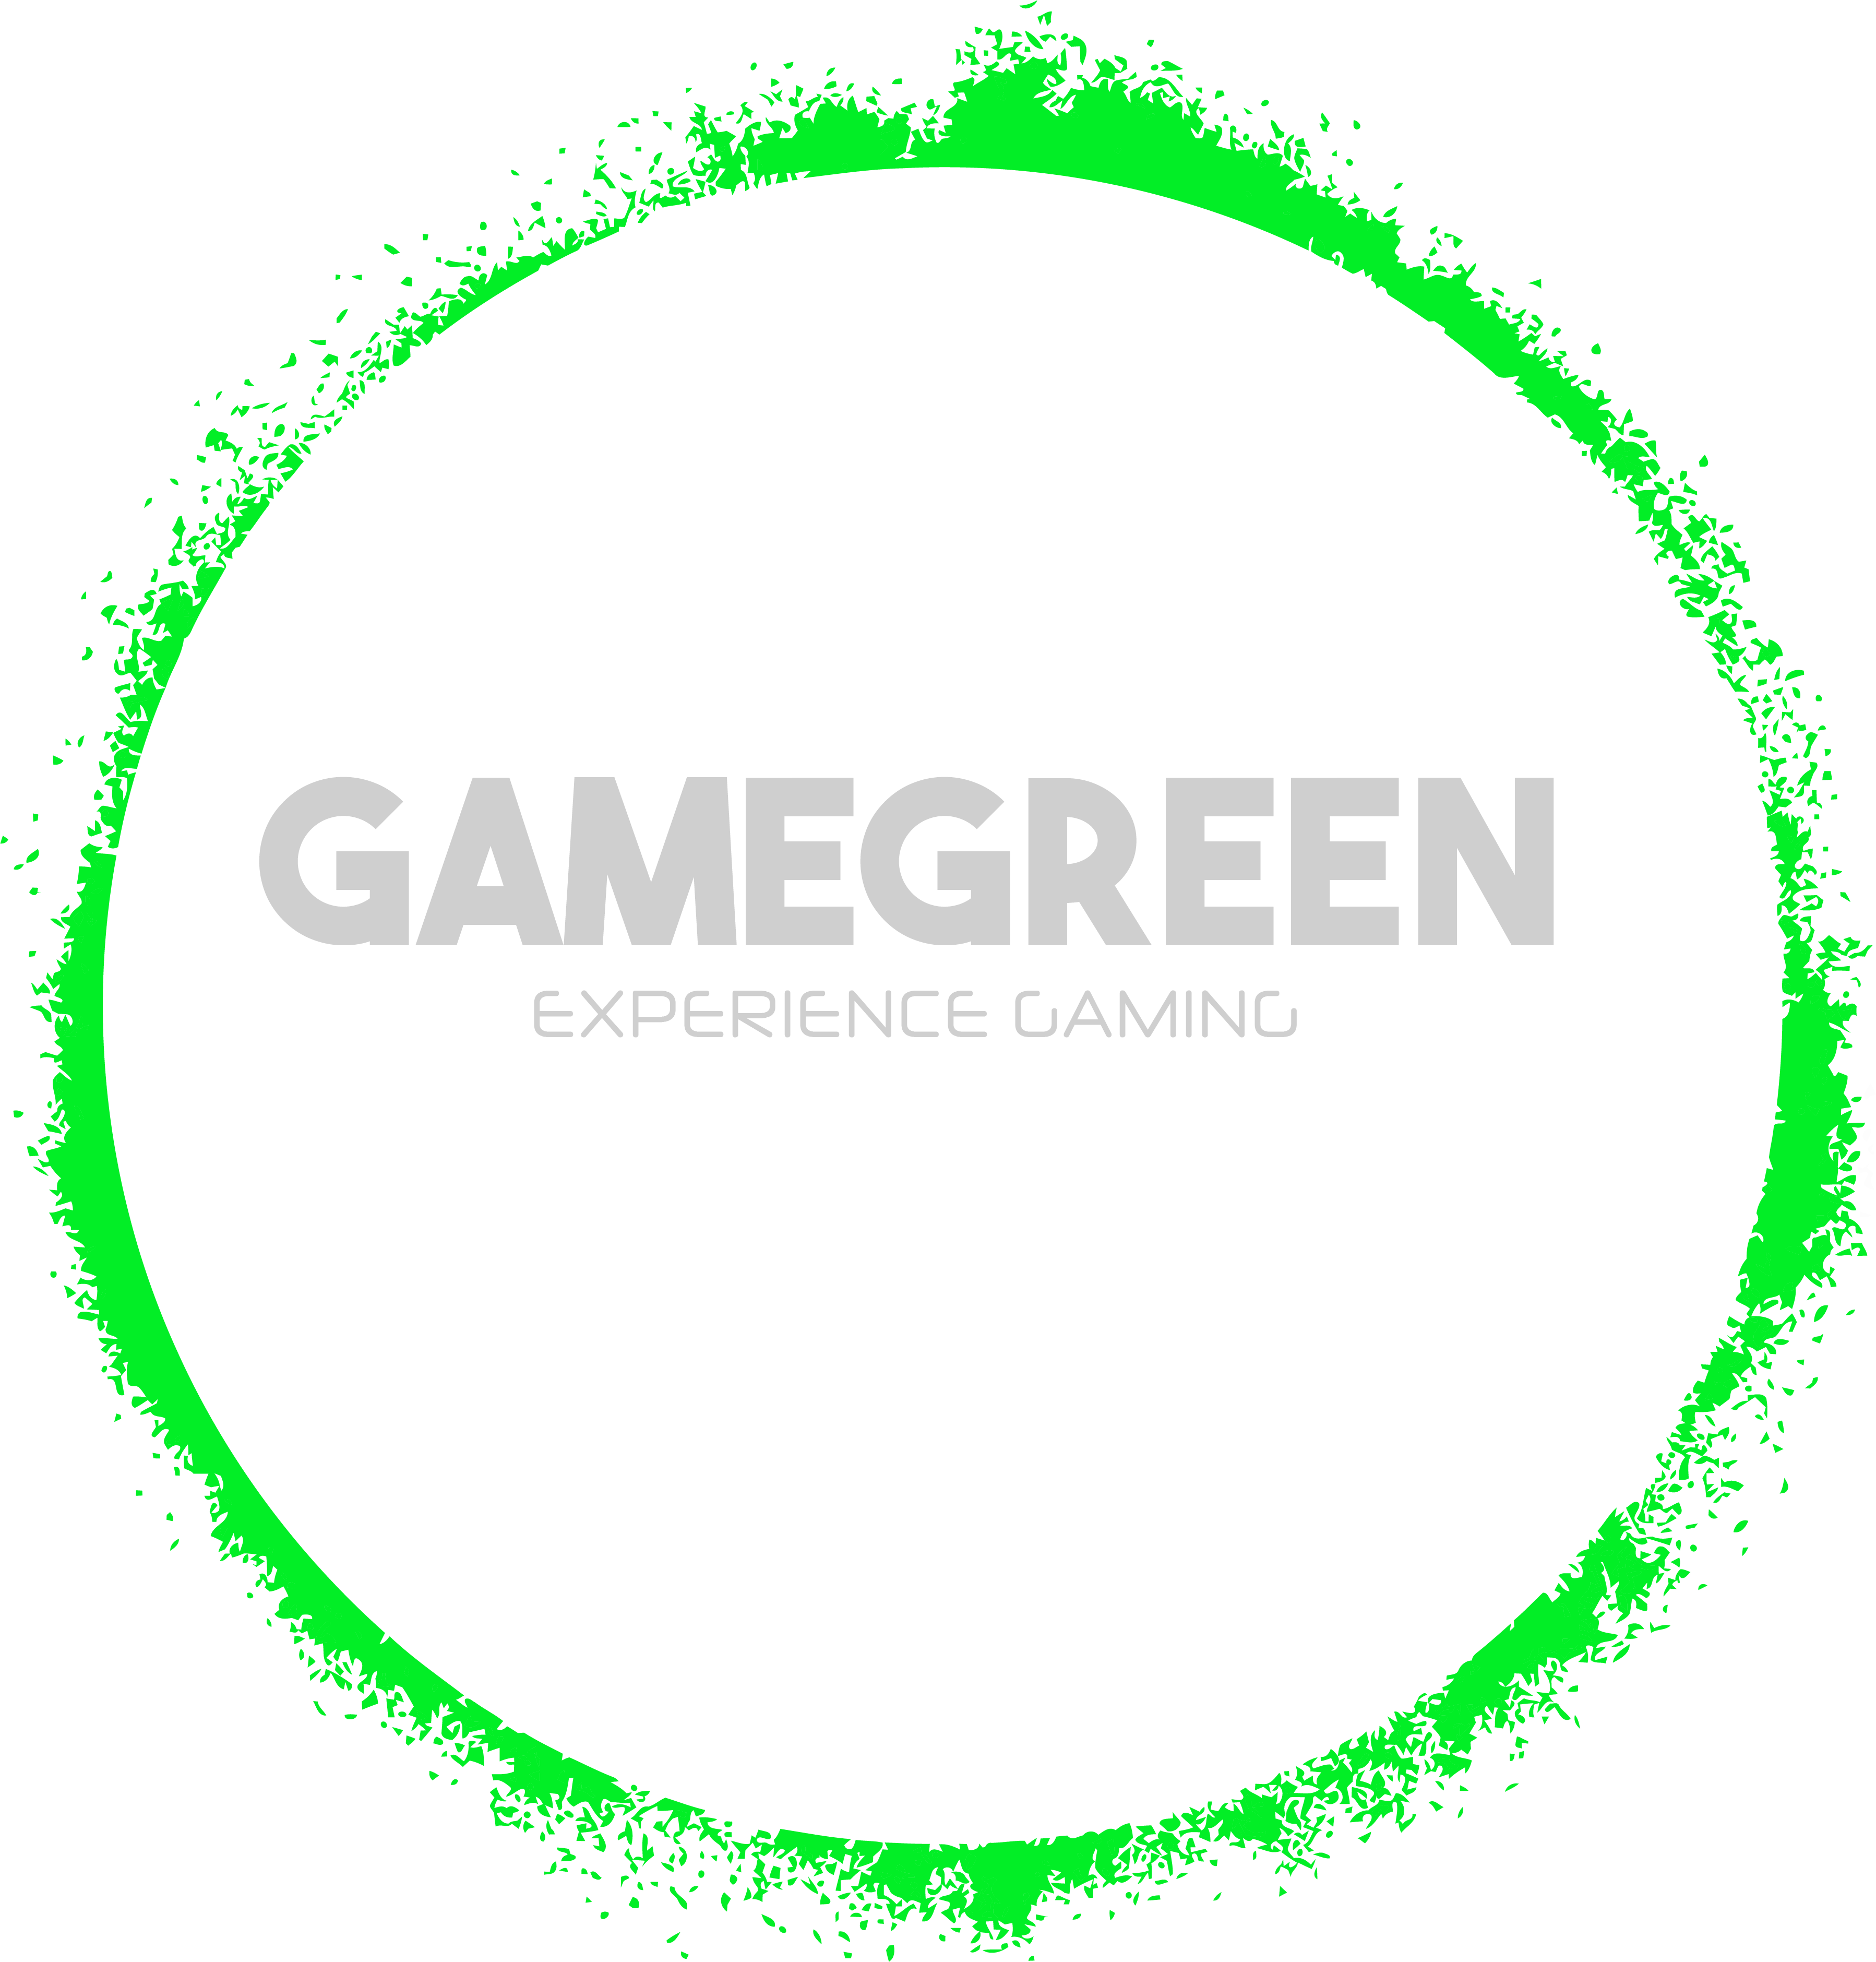 The Game Green